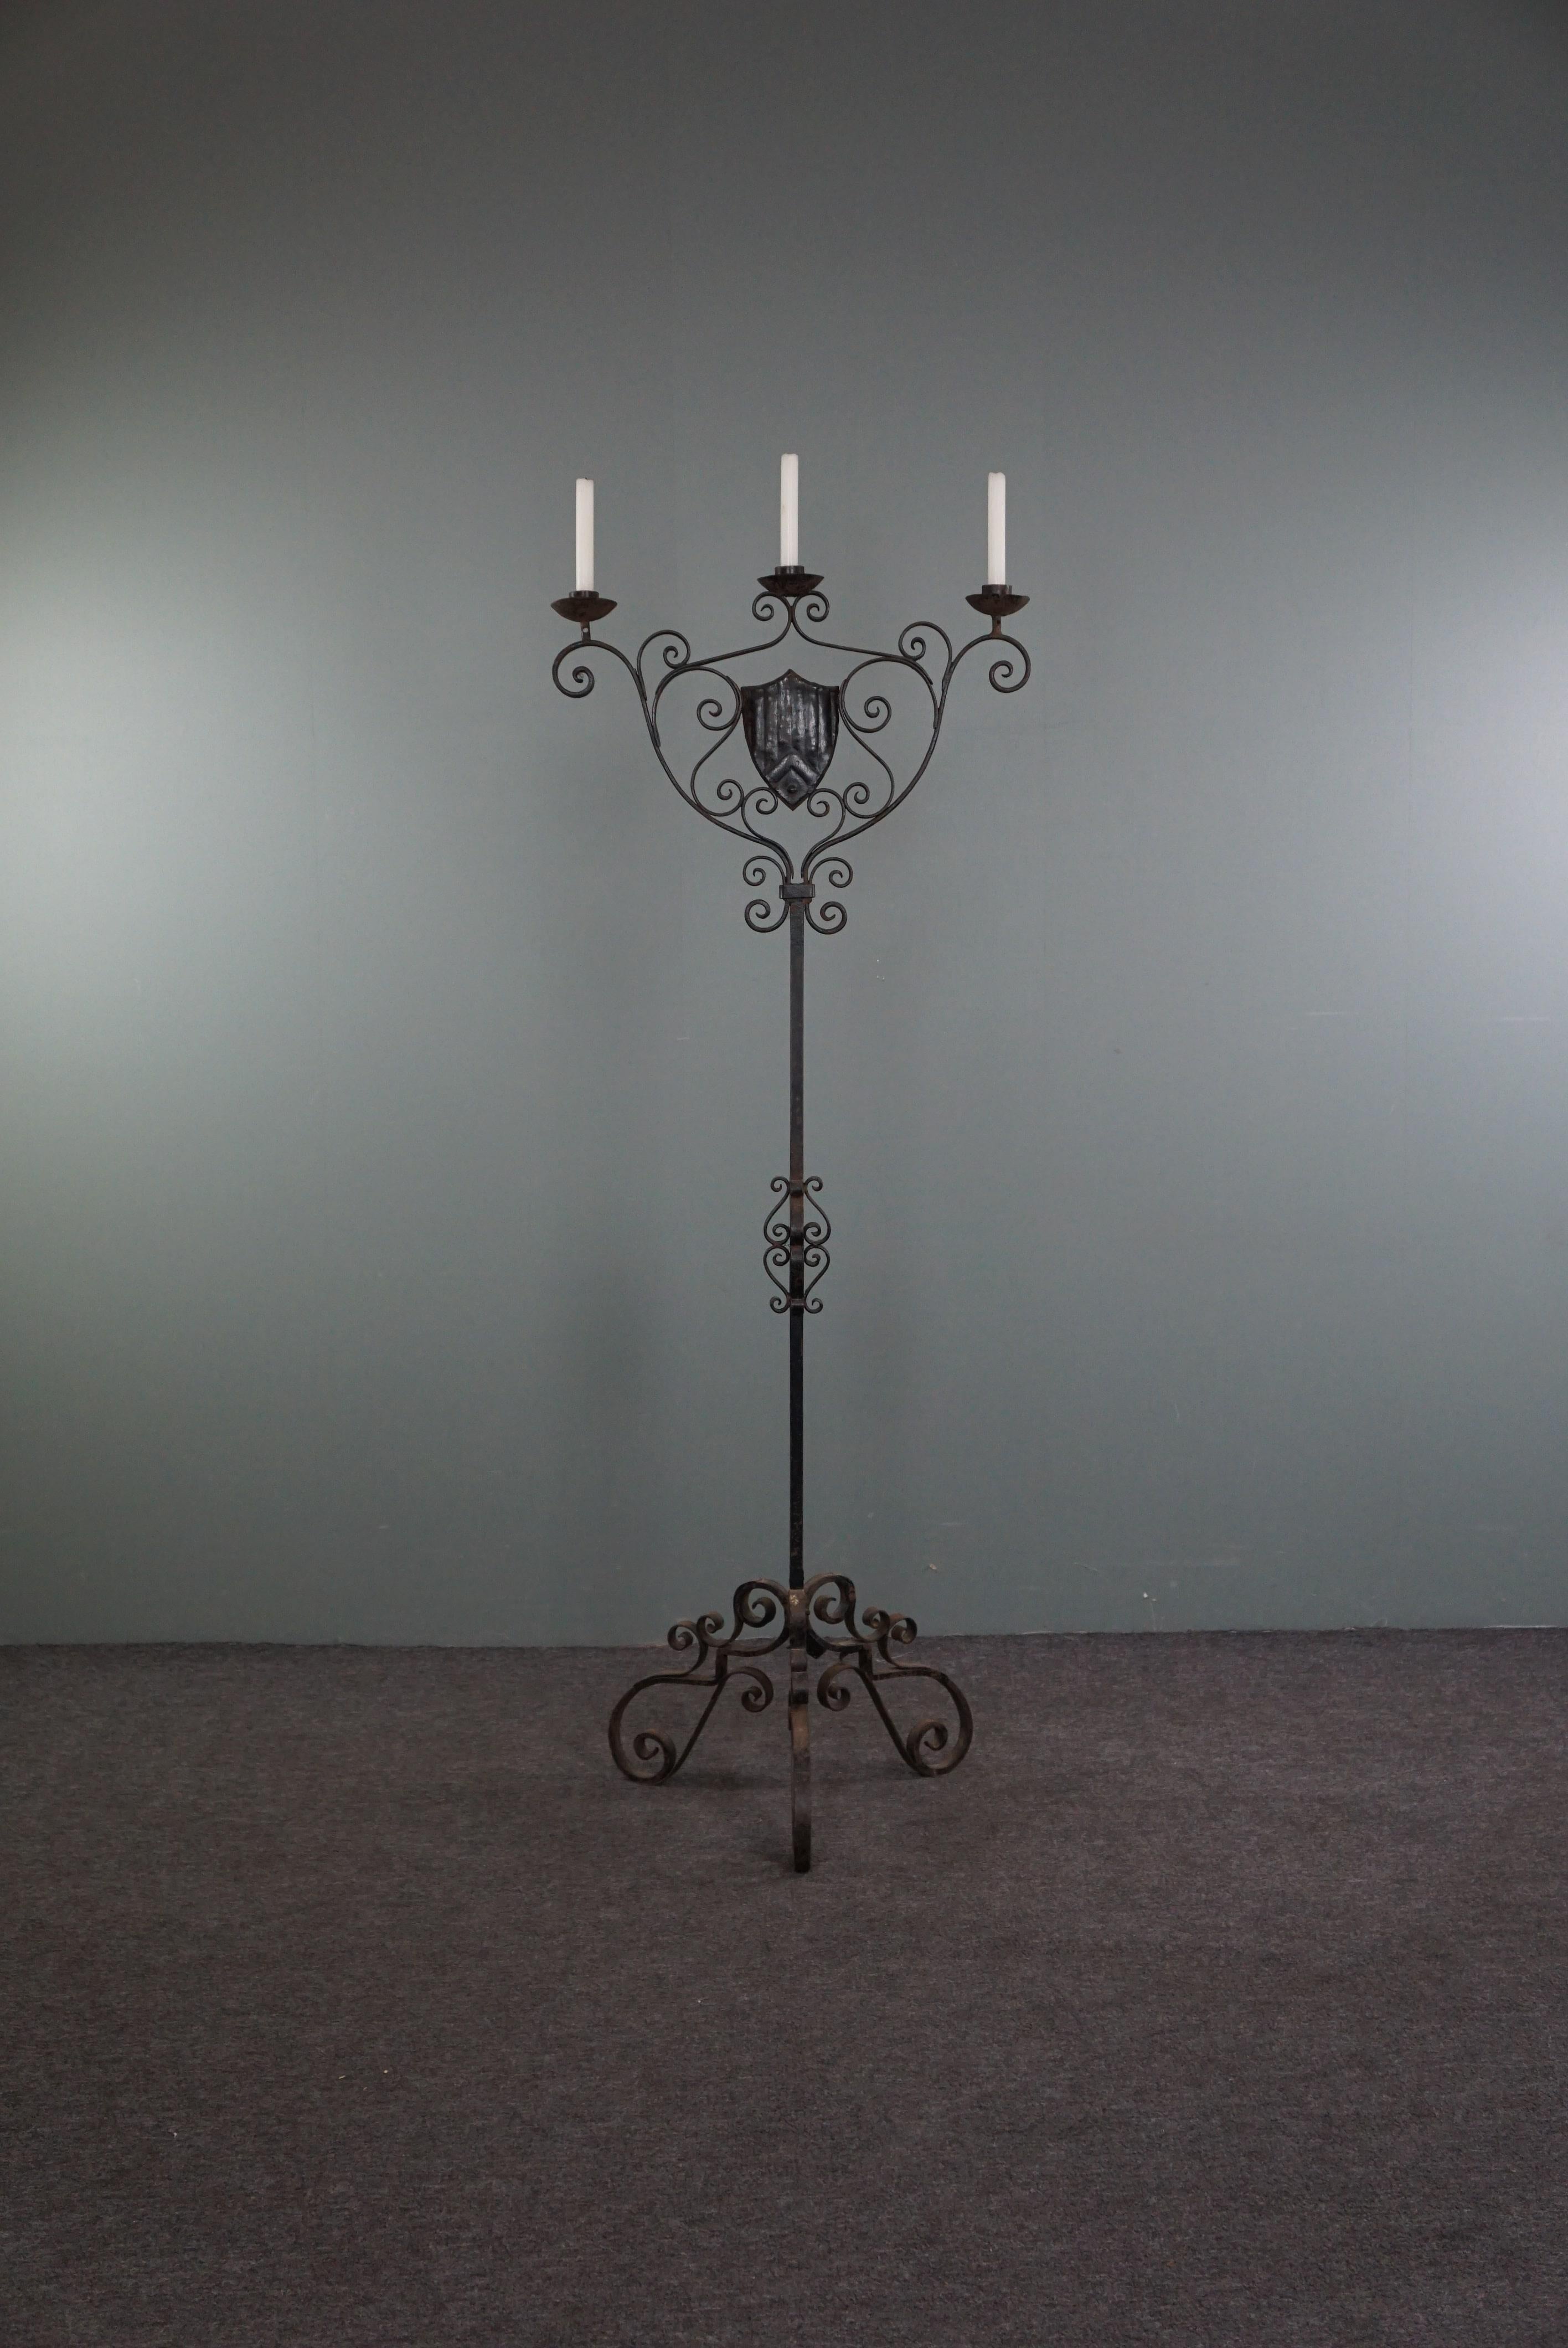 Offered is this English candlestick.
This candlestick would not look out of place in a large castle room next to a fireplace. But to create this feeling at home, you don't have to live in a castle. This candle holder is so impressive and striking in